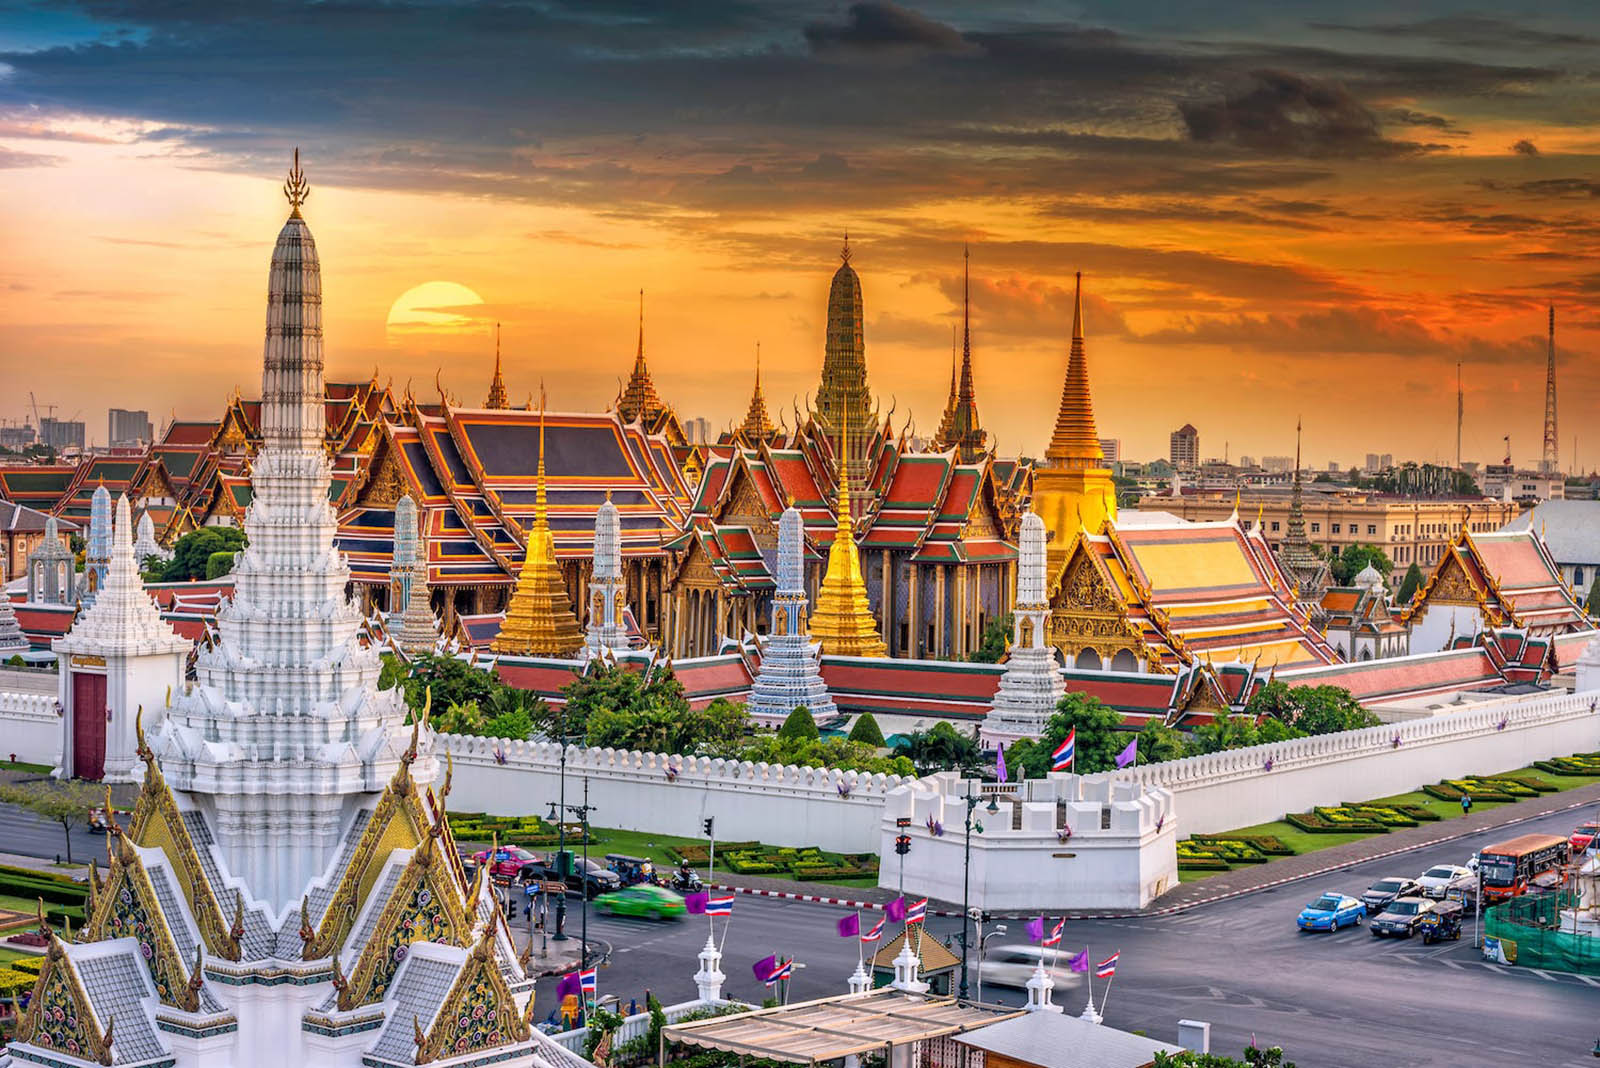 🗺 Most People Can’t Match 20/24 of These Famous Places to Their Country on a Map – Can You? Grand Palace, Bangkok, Thailand